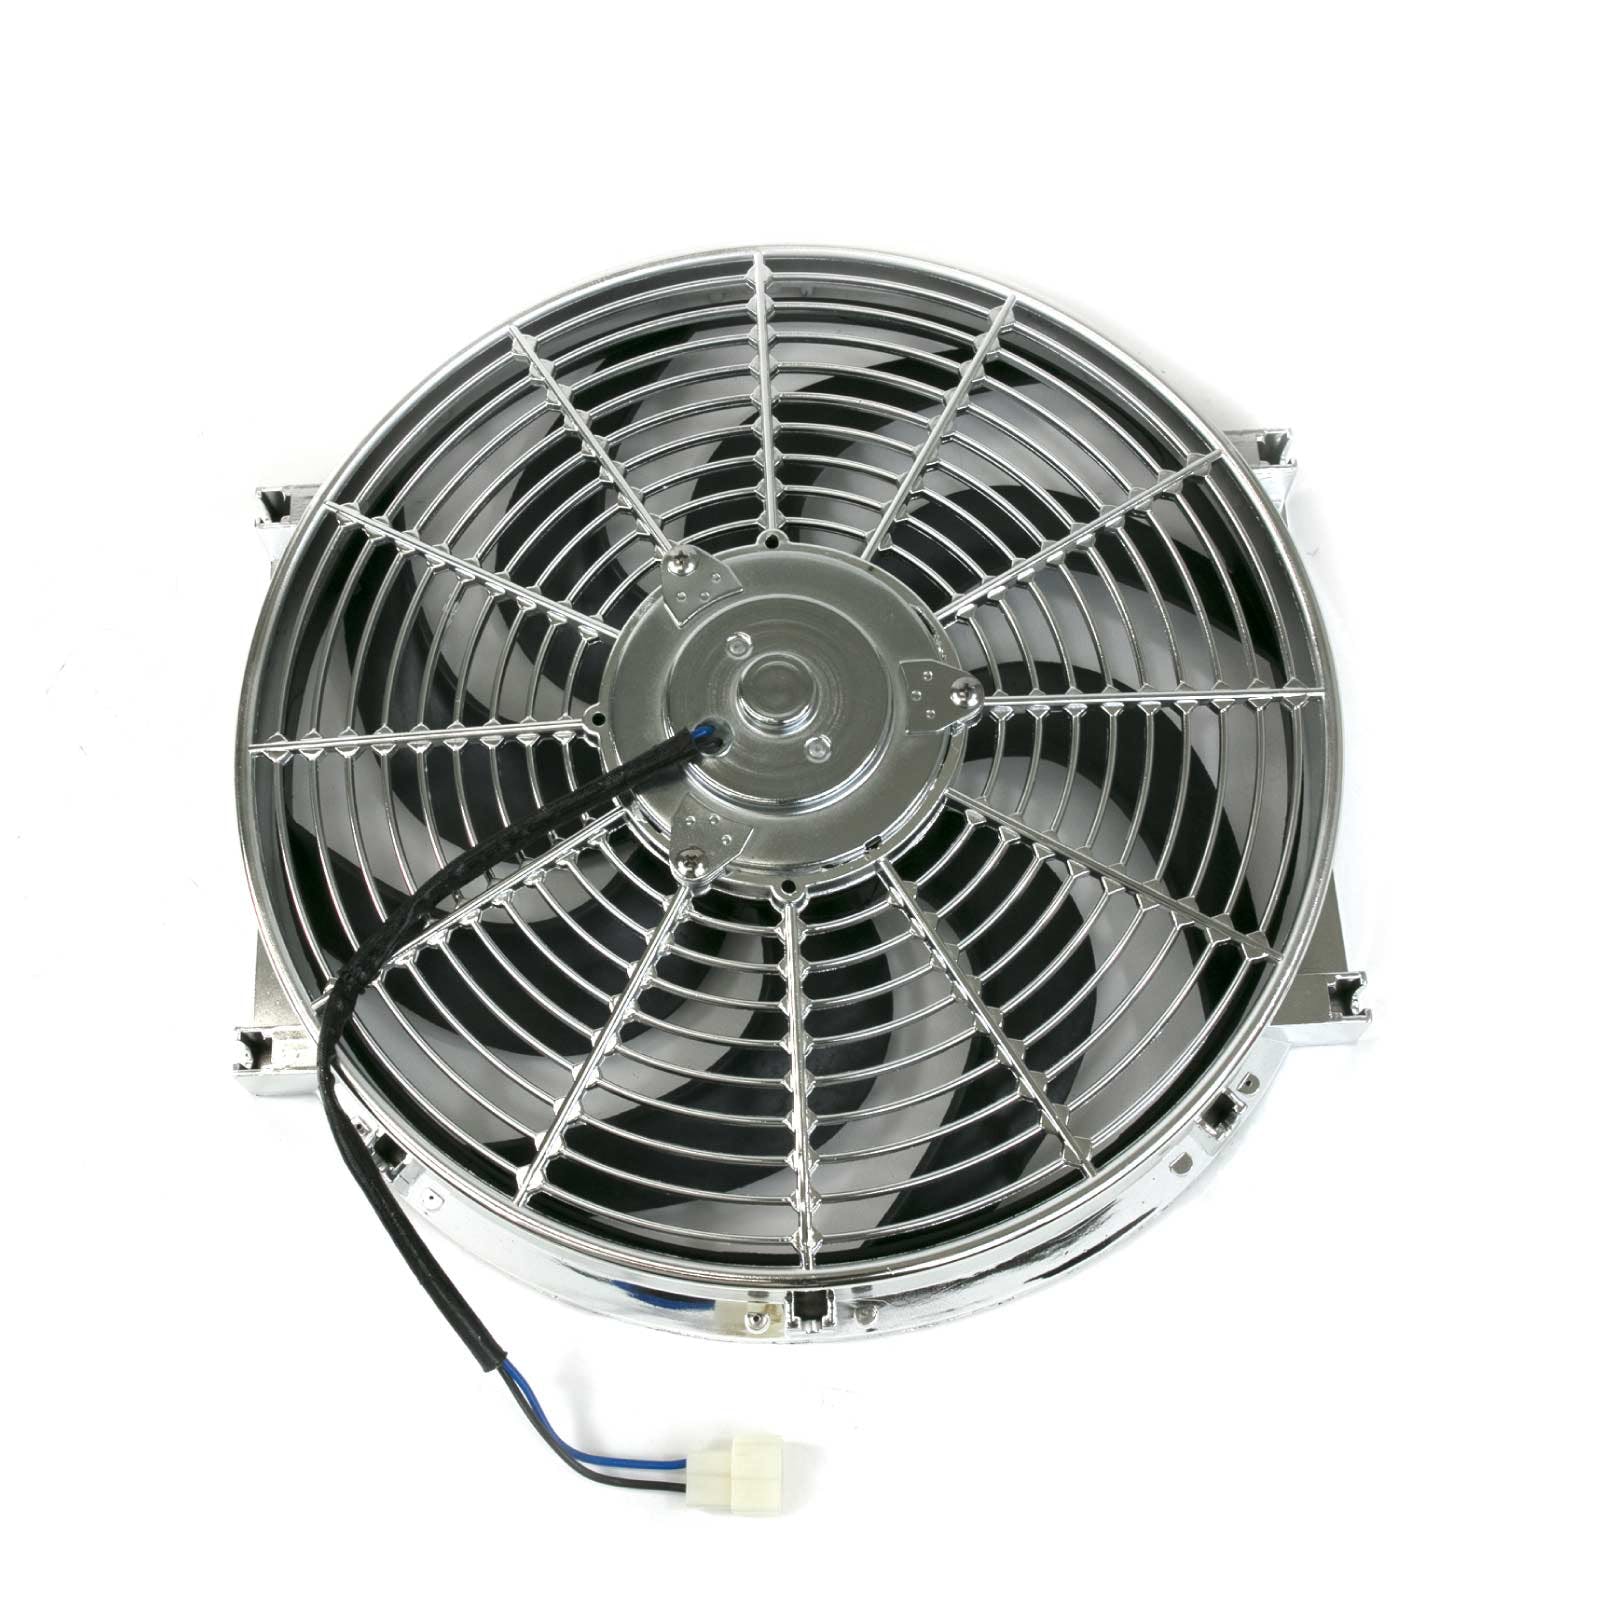 Top Street Performance HC6104C 14 inch Universal Electric Cooling Fan, S-Blade, Chrome